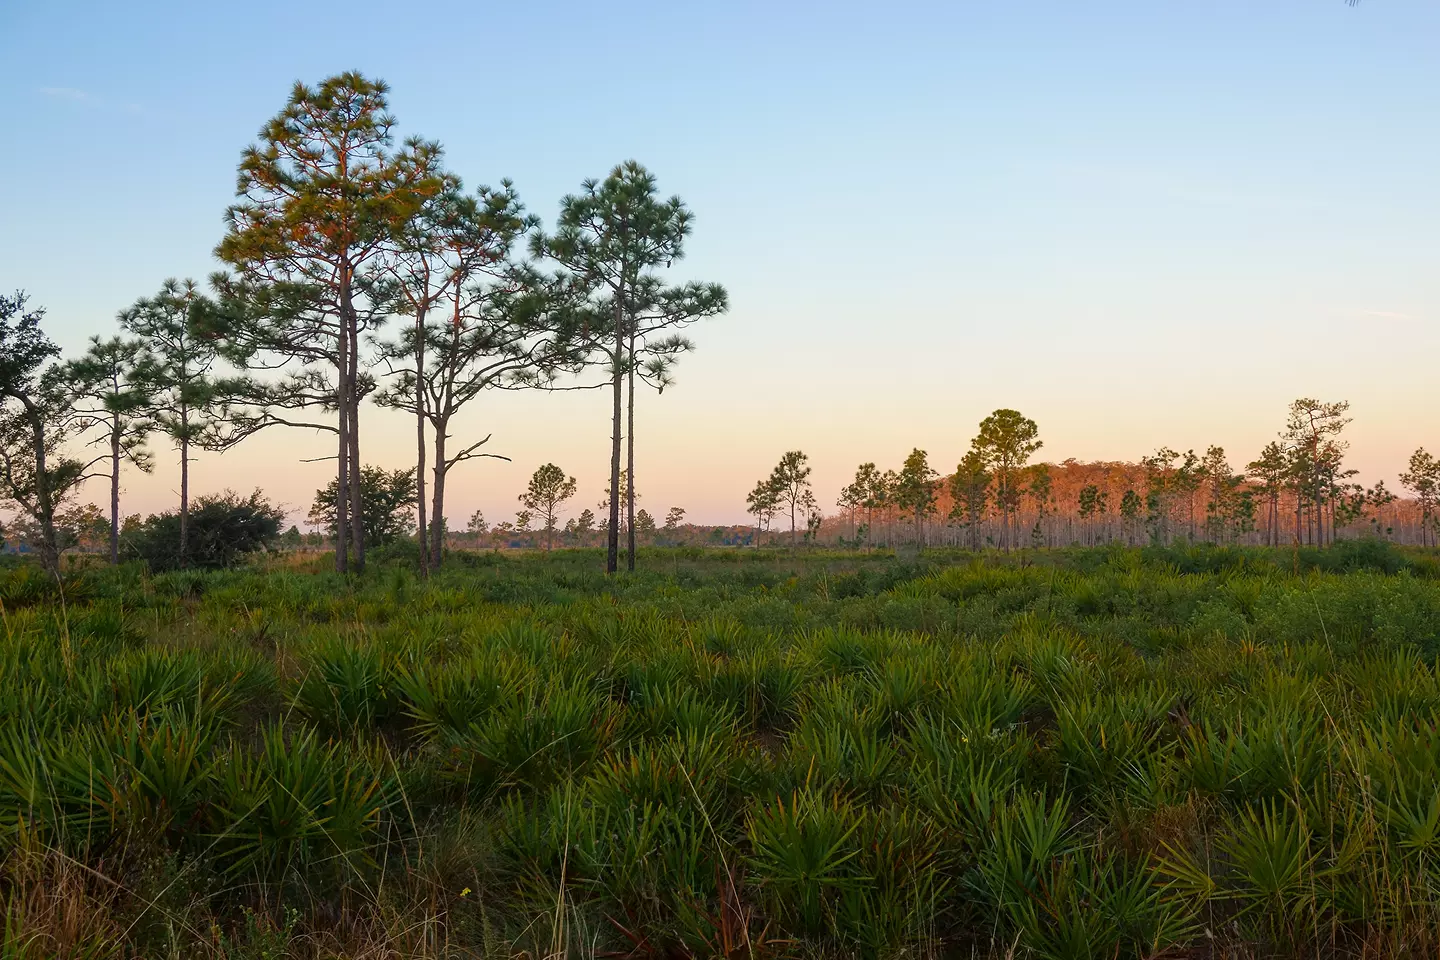 Sunrise at Three Lakes Wildlife Management Area south of Orlando, Florida. This rare ecosystem is home to threatened species such as the Longleaf Pine, Saw Palmetto, and the Red Cockaded Woodpecker., Sunrise at Three Lakes Wildlife Management Area south of Orlando